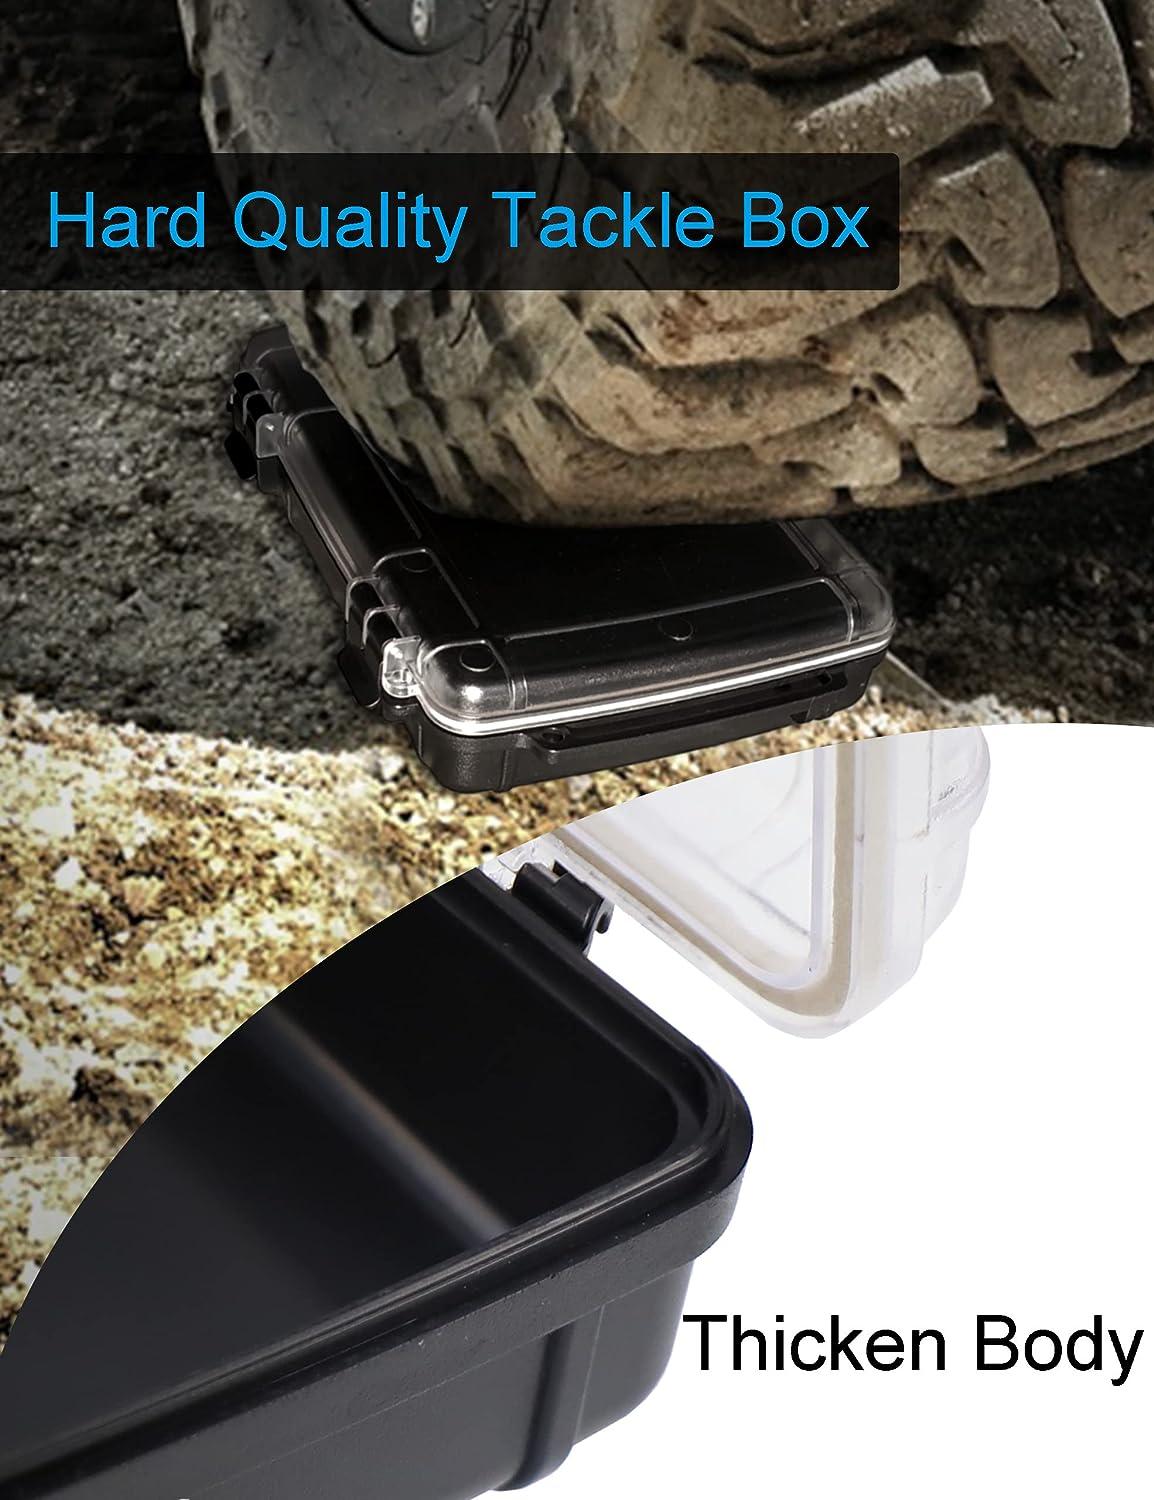 Hlotmeky Waterproof Dry Box Case Watertight Storage Containers for